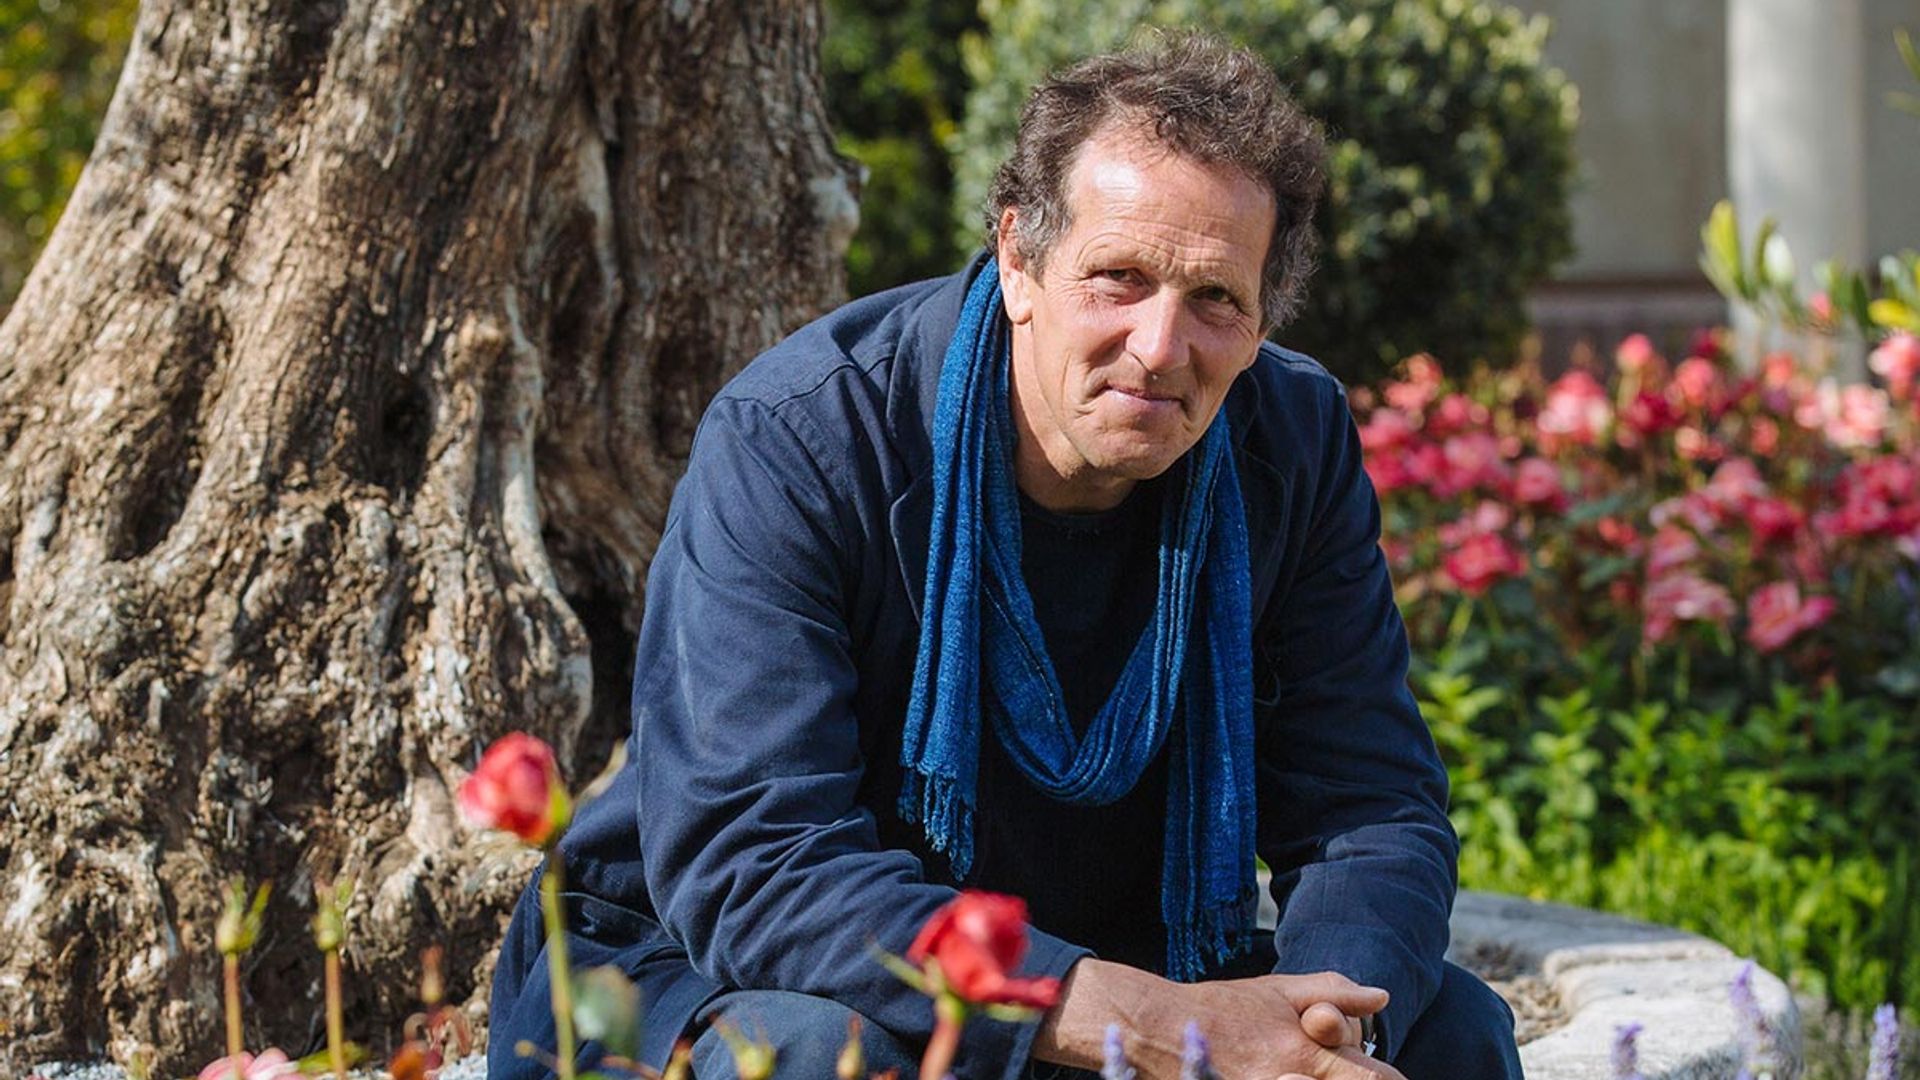 Gardeners World Star Monty Don Apologies To Fan After Ignoring Them At Previous Garden Show Hello